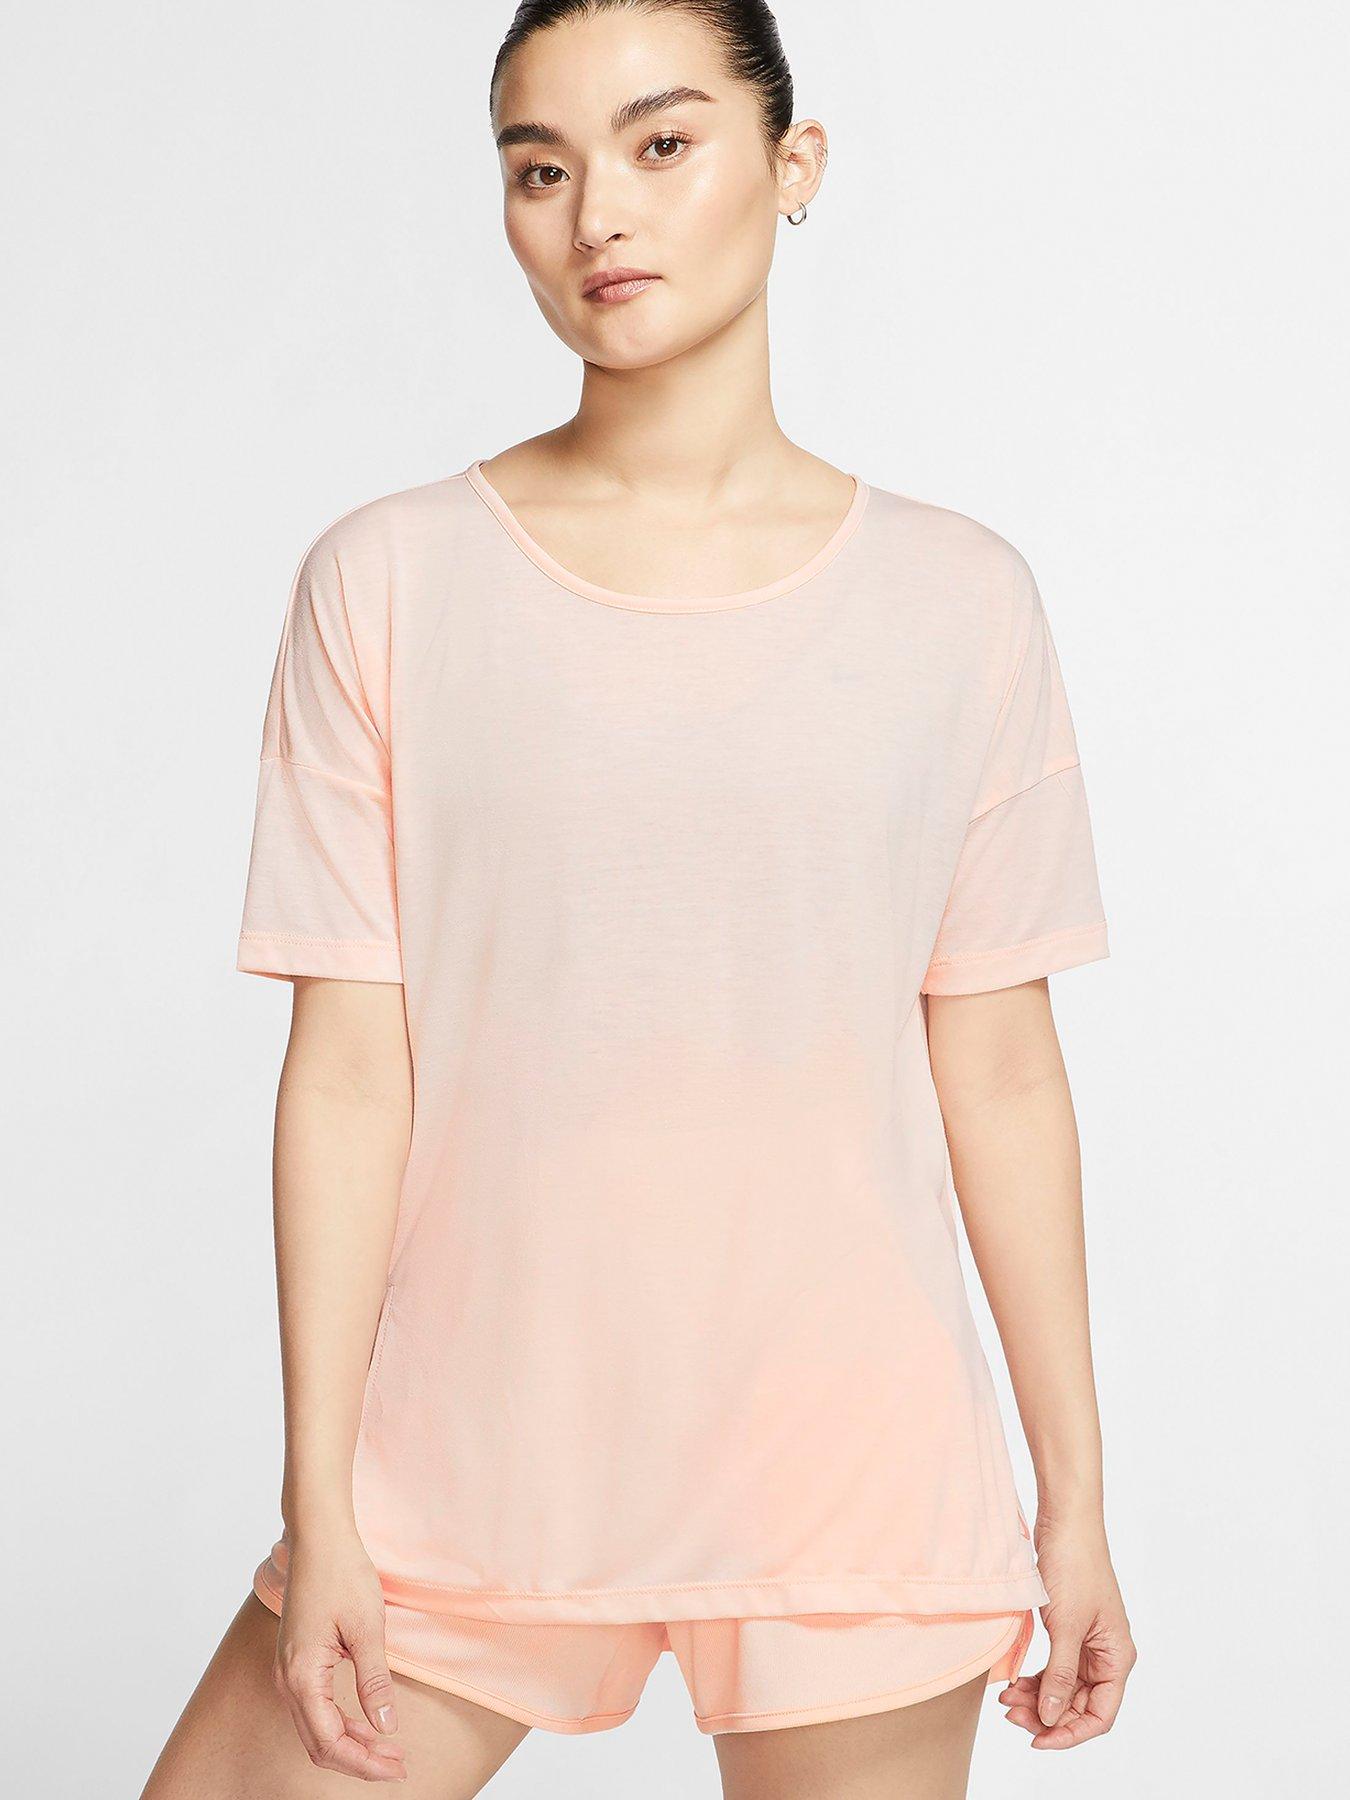 Women Yoga Dry Layer Short Sleeve Top - Coral